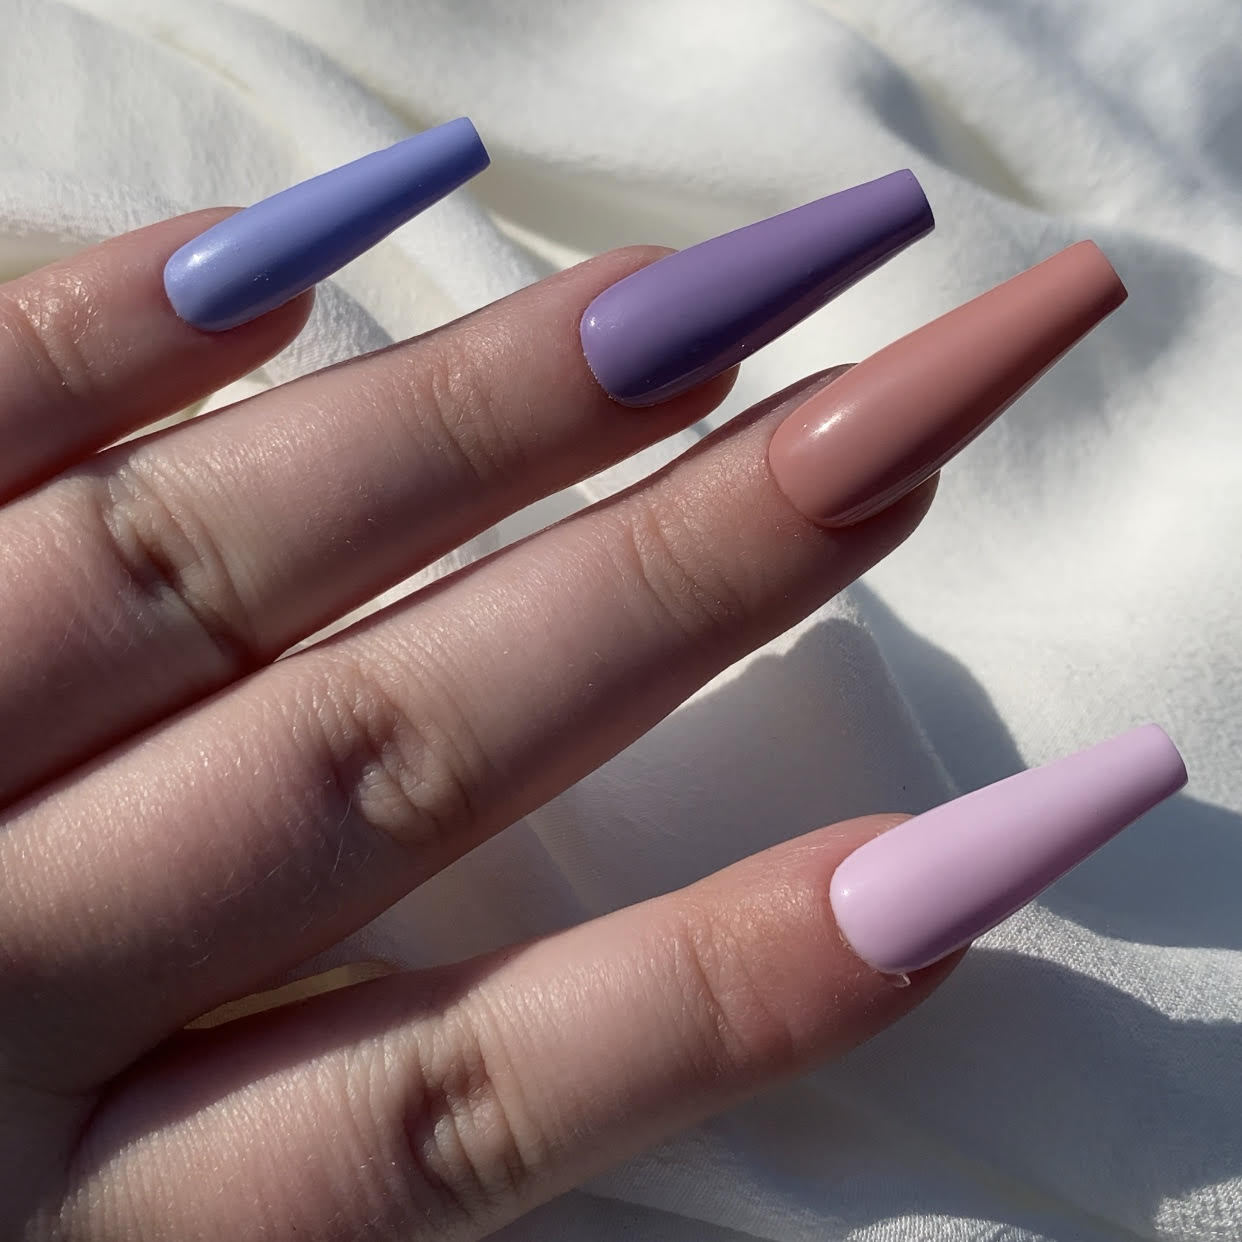 Baby got my initials on her nails and my favorite color | Acrylic nails  coffin pink, Purple nails, Purple acrylic nails